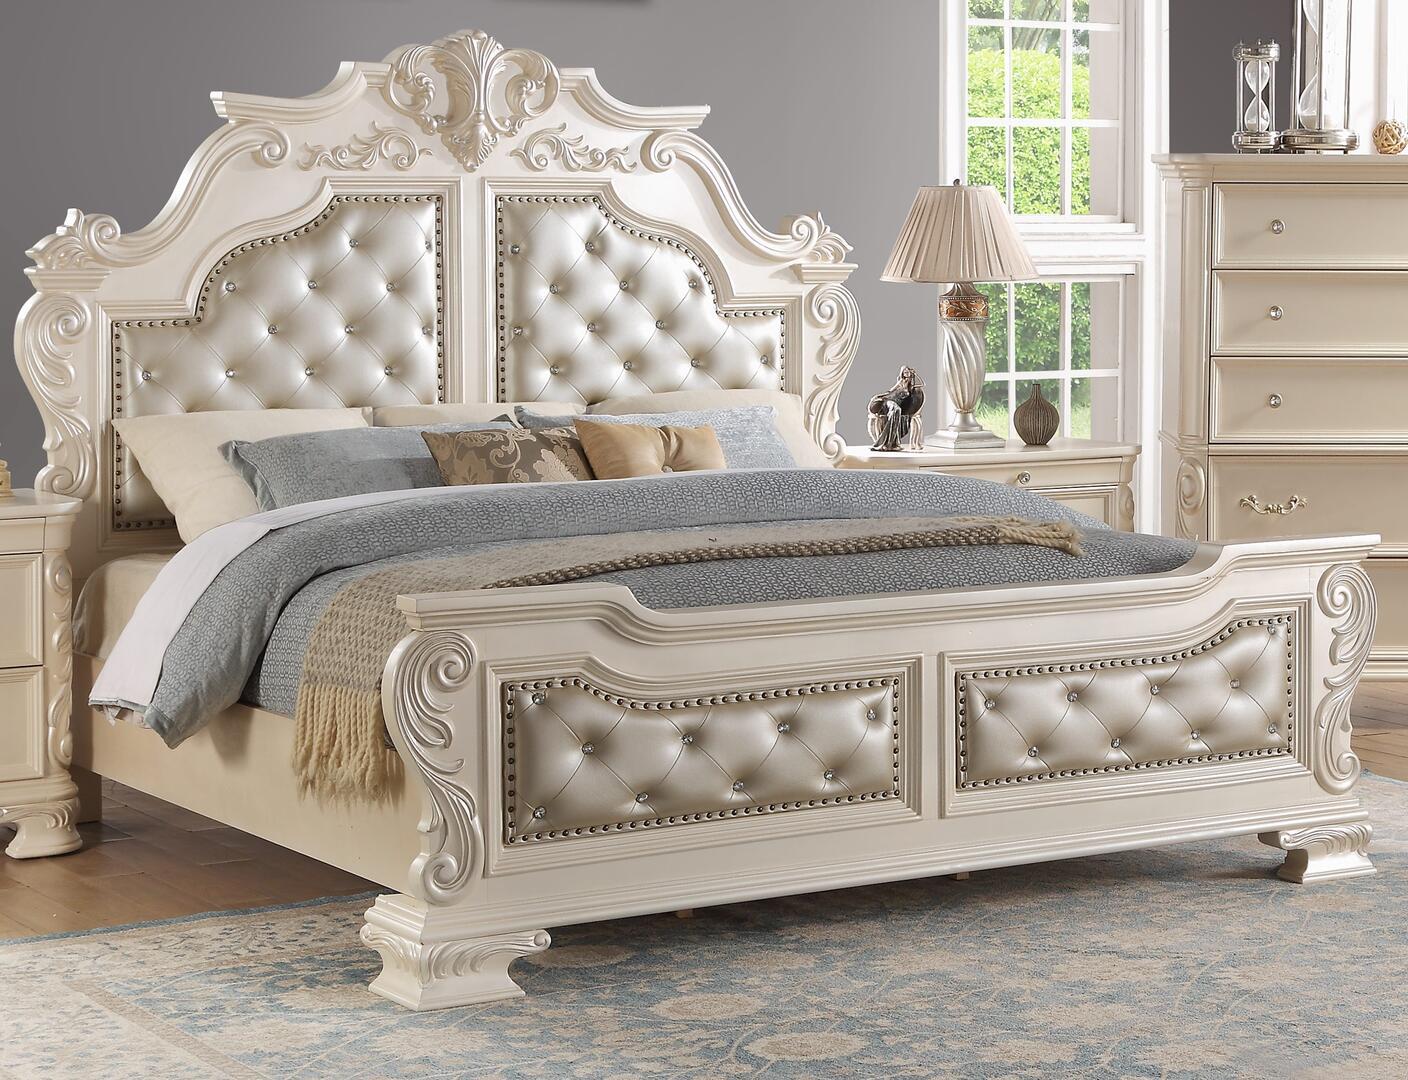 Traditional Panel Bed Victoria Victoria-K-Bed in White Faux Leather